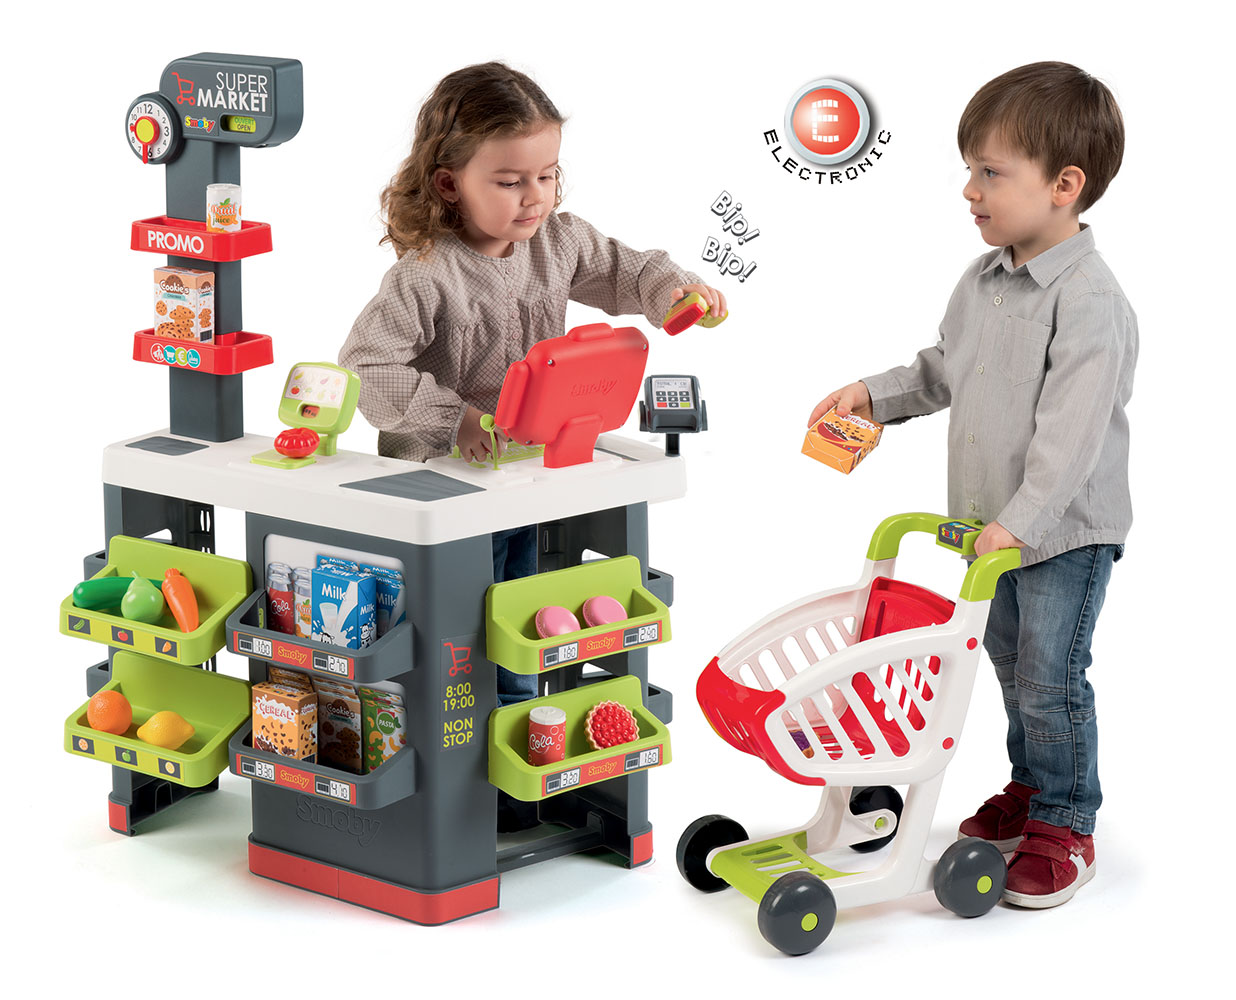 jouets smoby filles